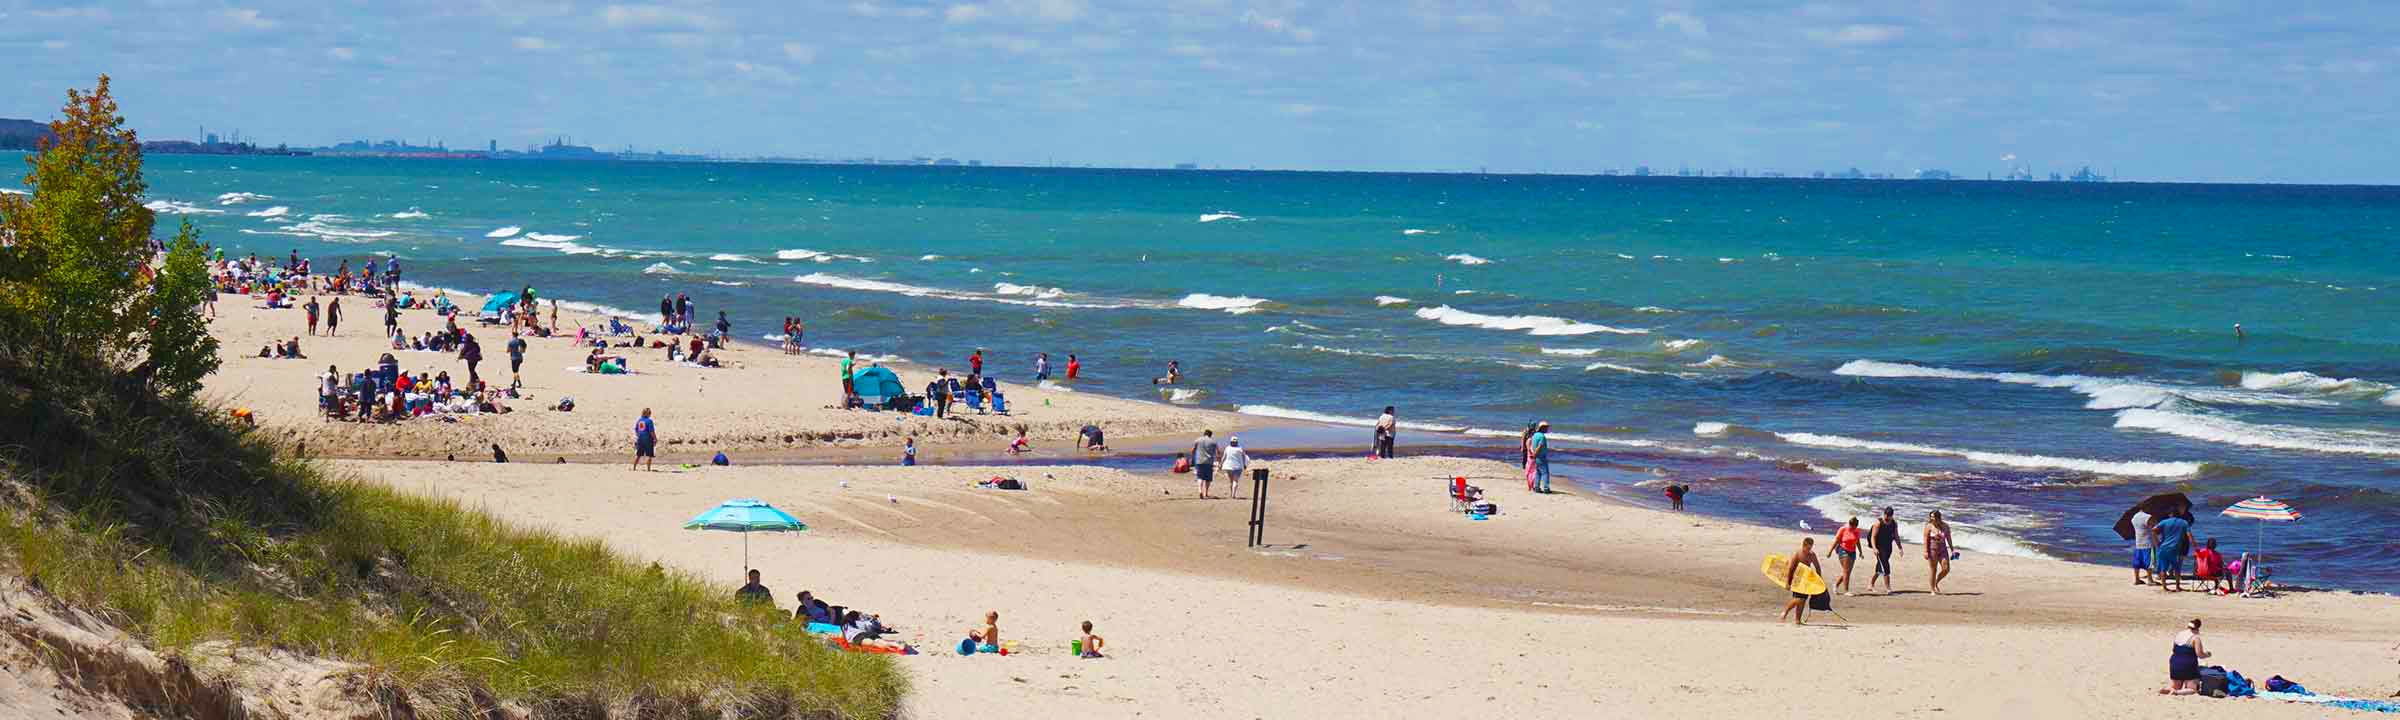 New Article Beaches And Beyond Indiana Dunes Article In Aaa Home